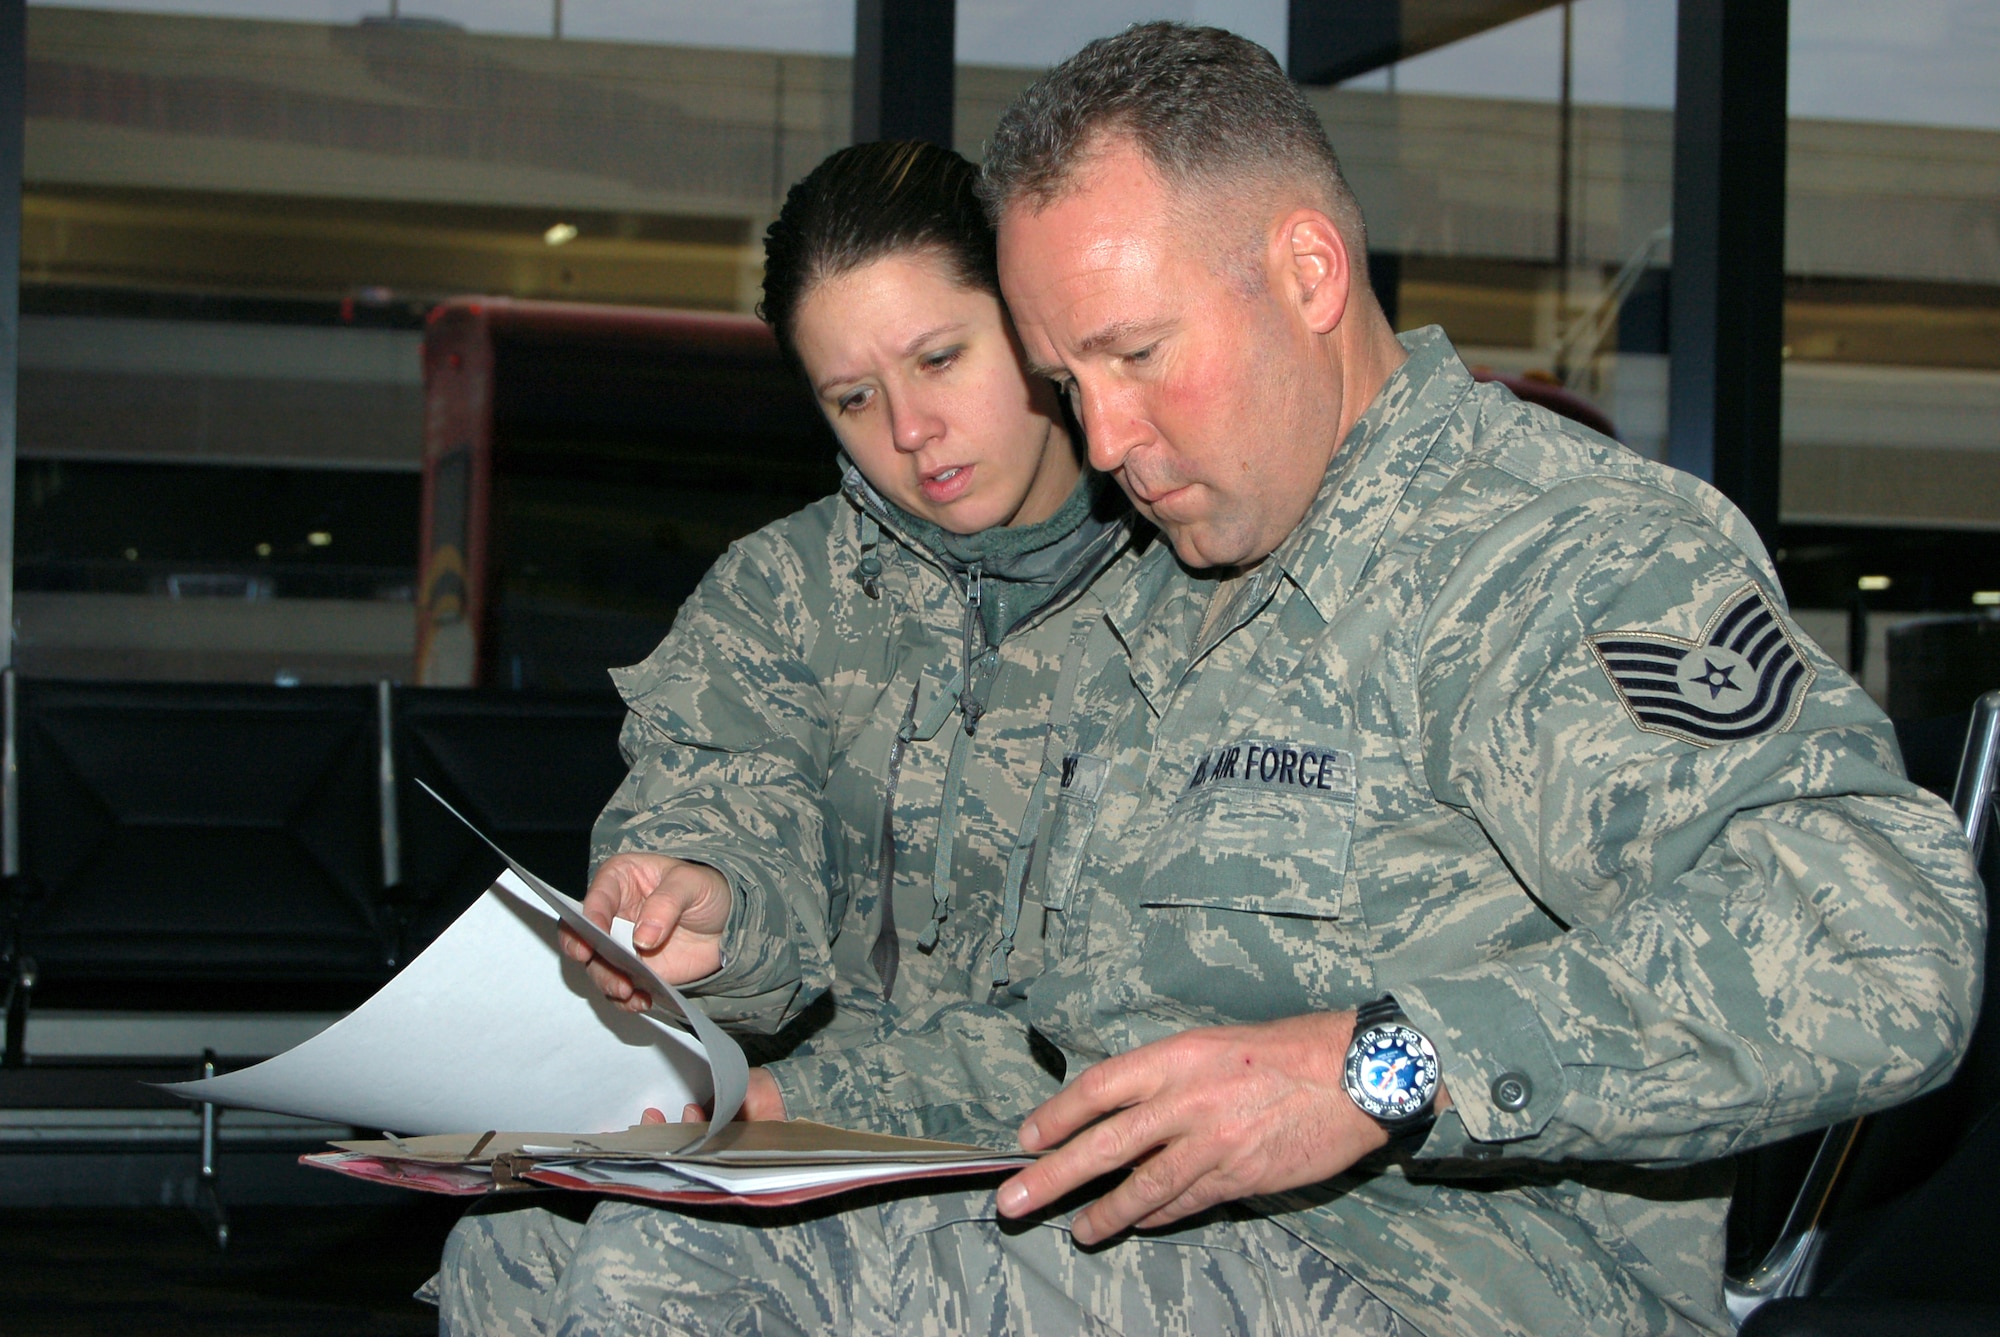 1st Lt. Cheryl L. Mead, the installation deployment officer, 103rd Logistics Readiness Squadron, reviews a deployment checklist with Tech. Sgt. Gregory Jones, readiness trainer with the 103rd Force Support Squadron. According to Mead, the turn around time from when Jones was notified and was then on a plane to leave for Haiti as part of a relief mission was just 17 hours. (U.S. Air Force photo by Tech. Sgt. Josh Mead)